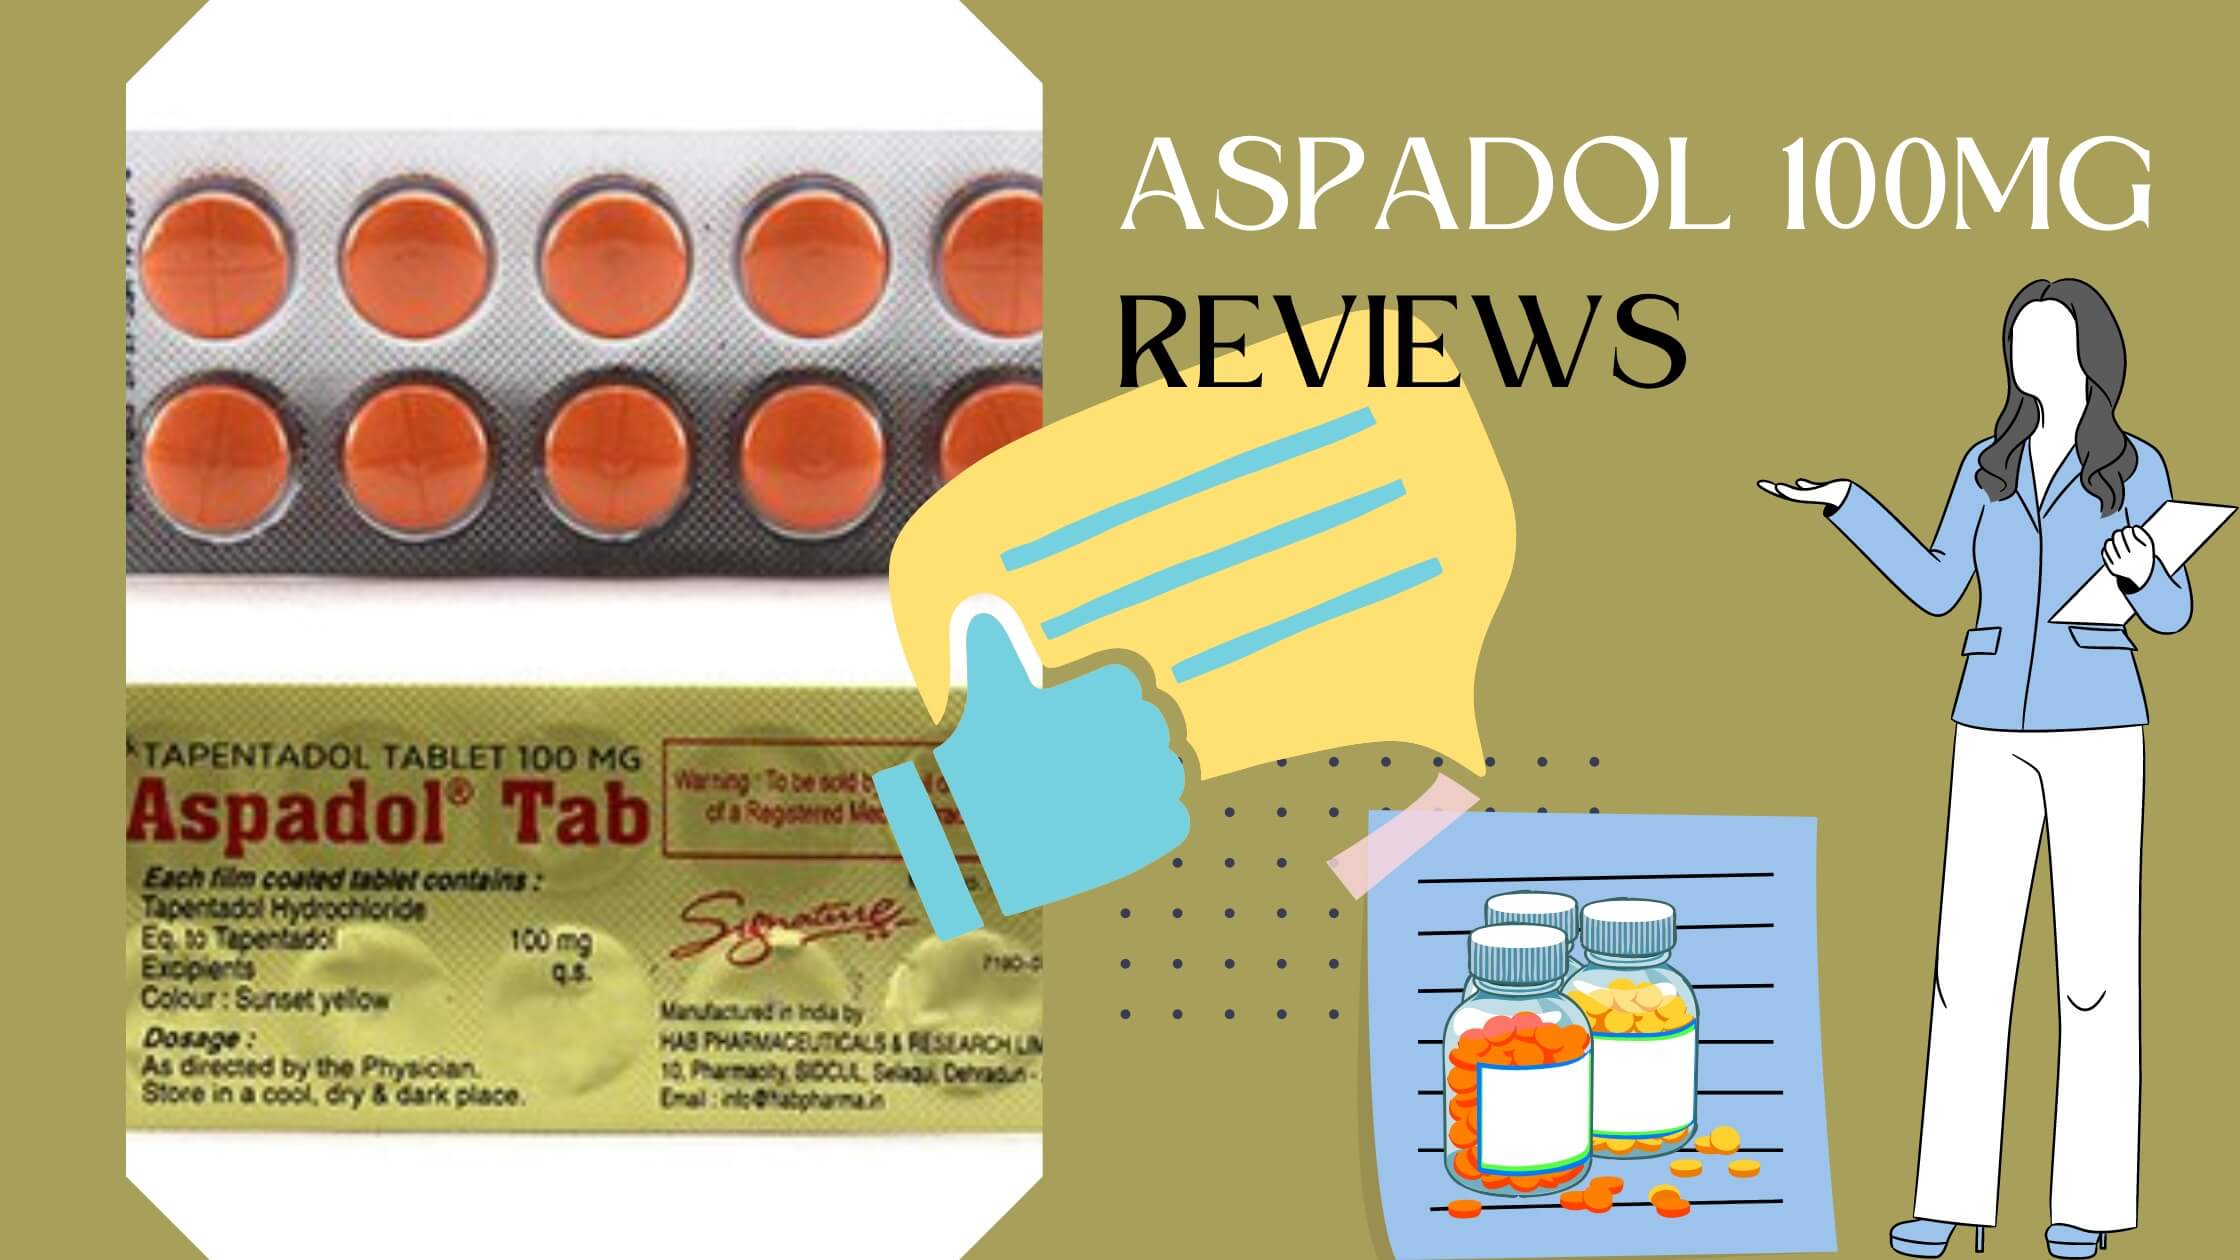 Tapentadol  Reviews - Uses & Safety